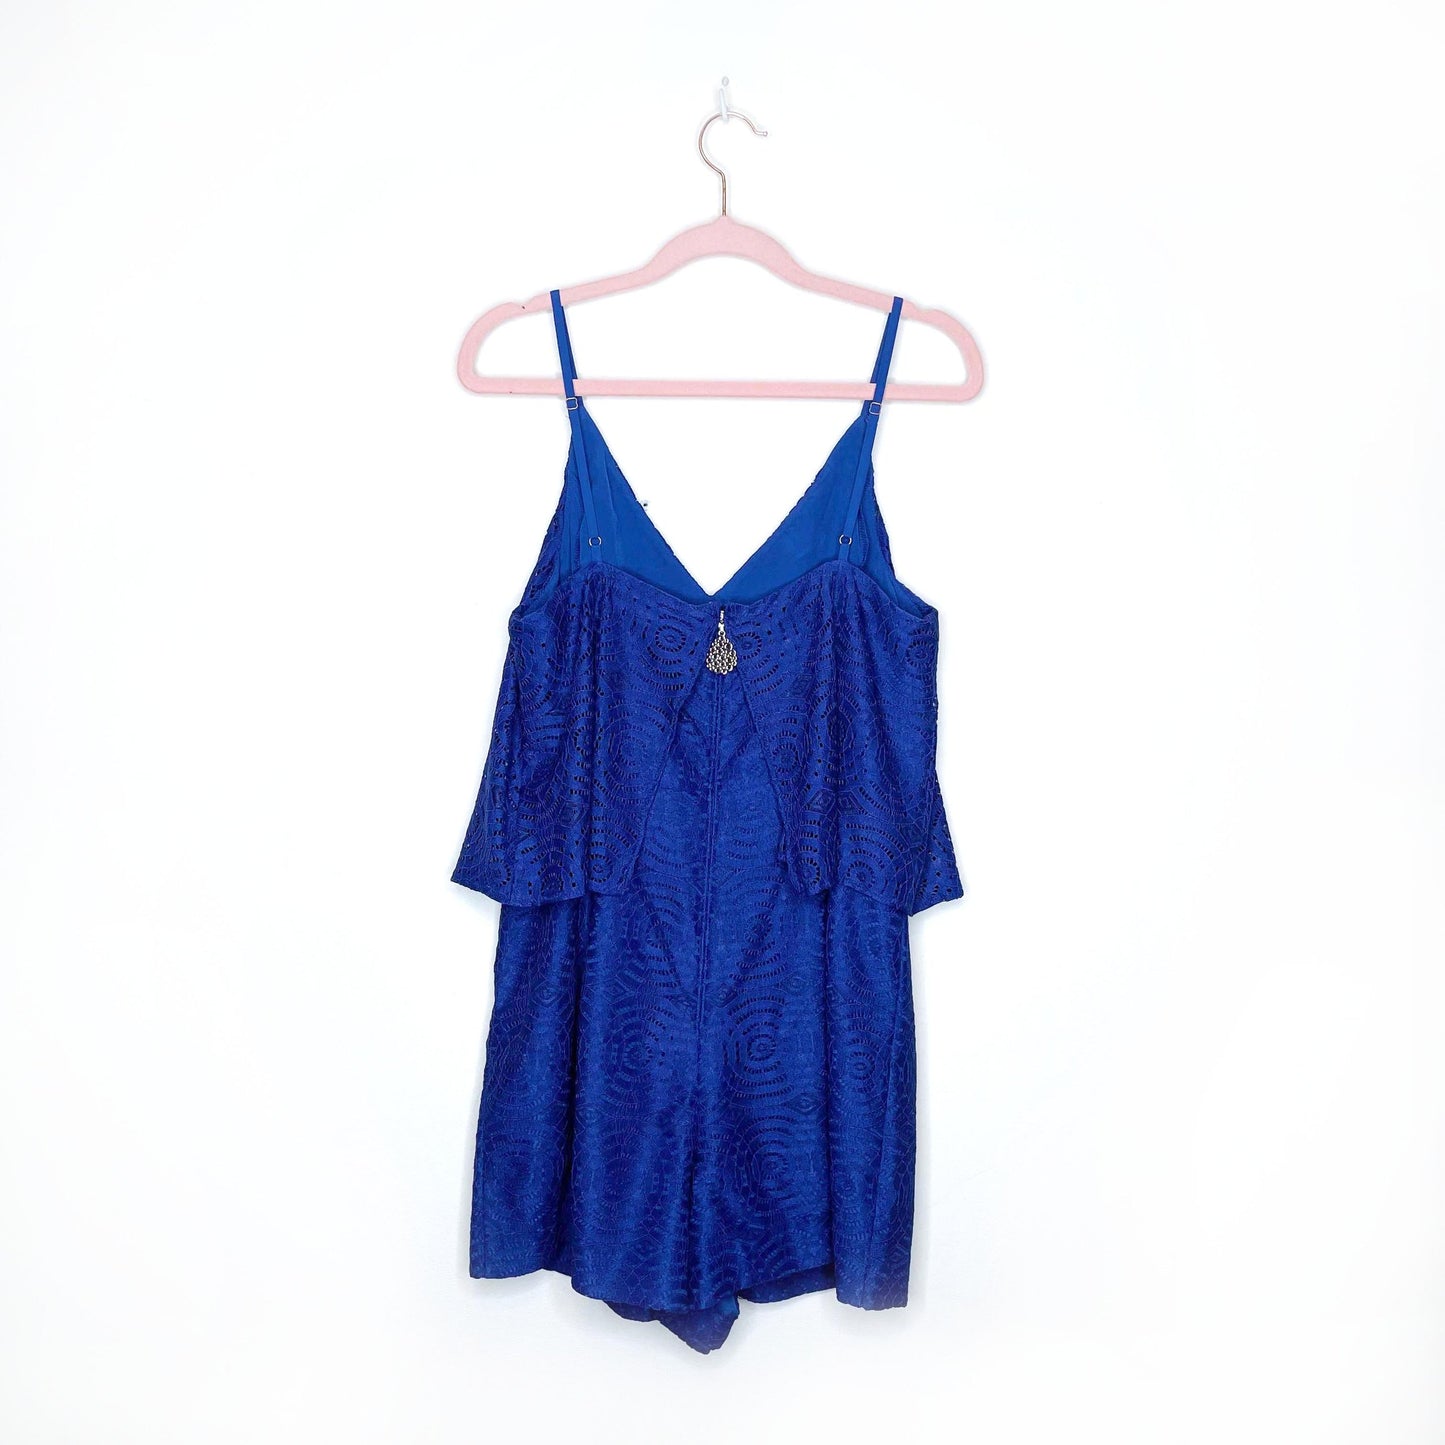 lilly pulitzer blue lace caia romper - size 8